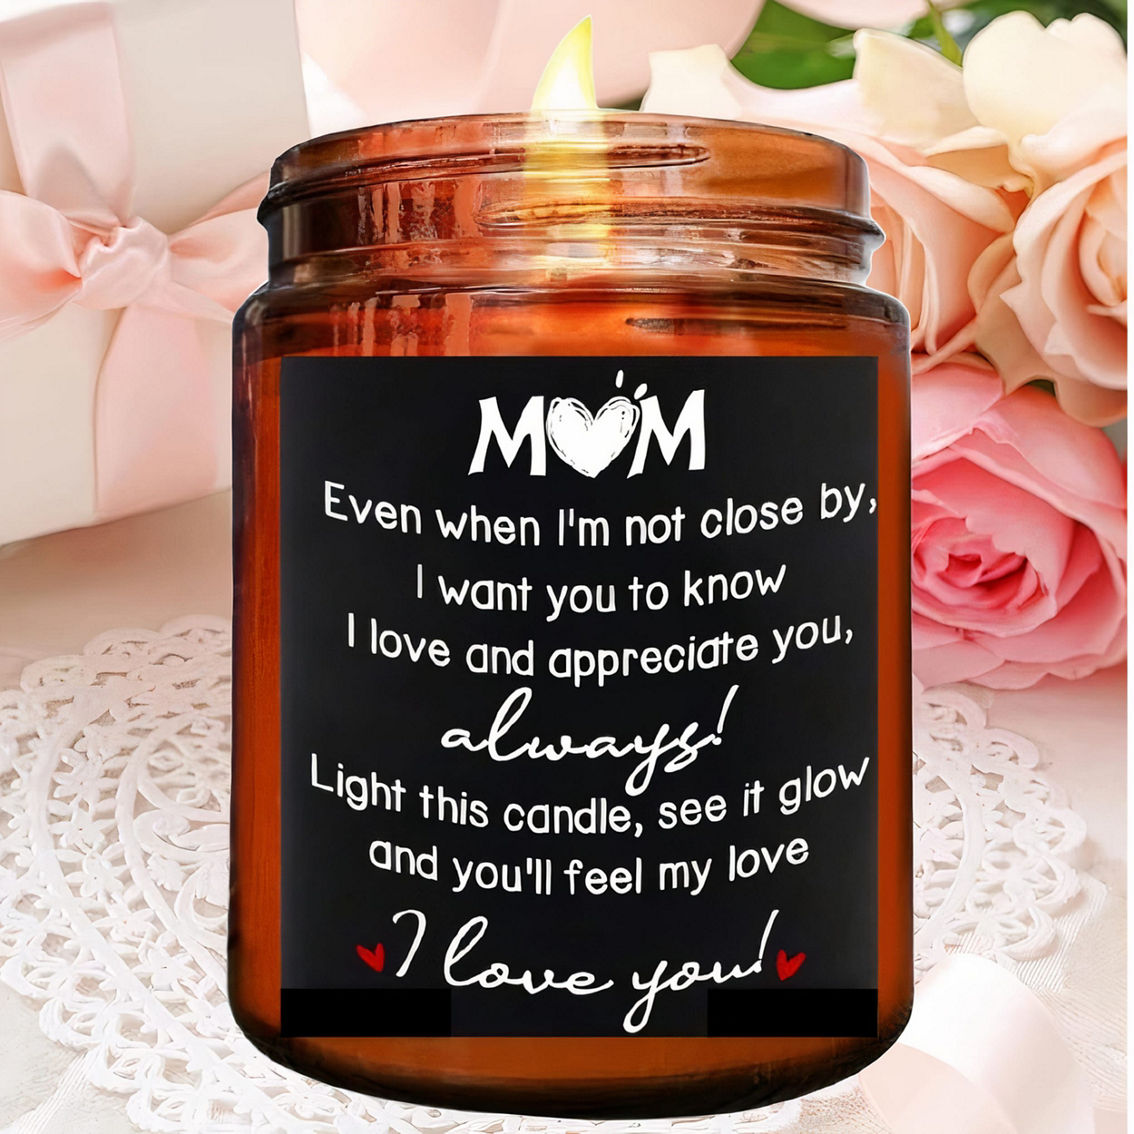 Lovery Mothers Day Lavender Scented Soy Wax Candle , MOM...Always! I Love You! - Image 4 of 5